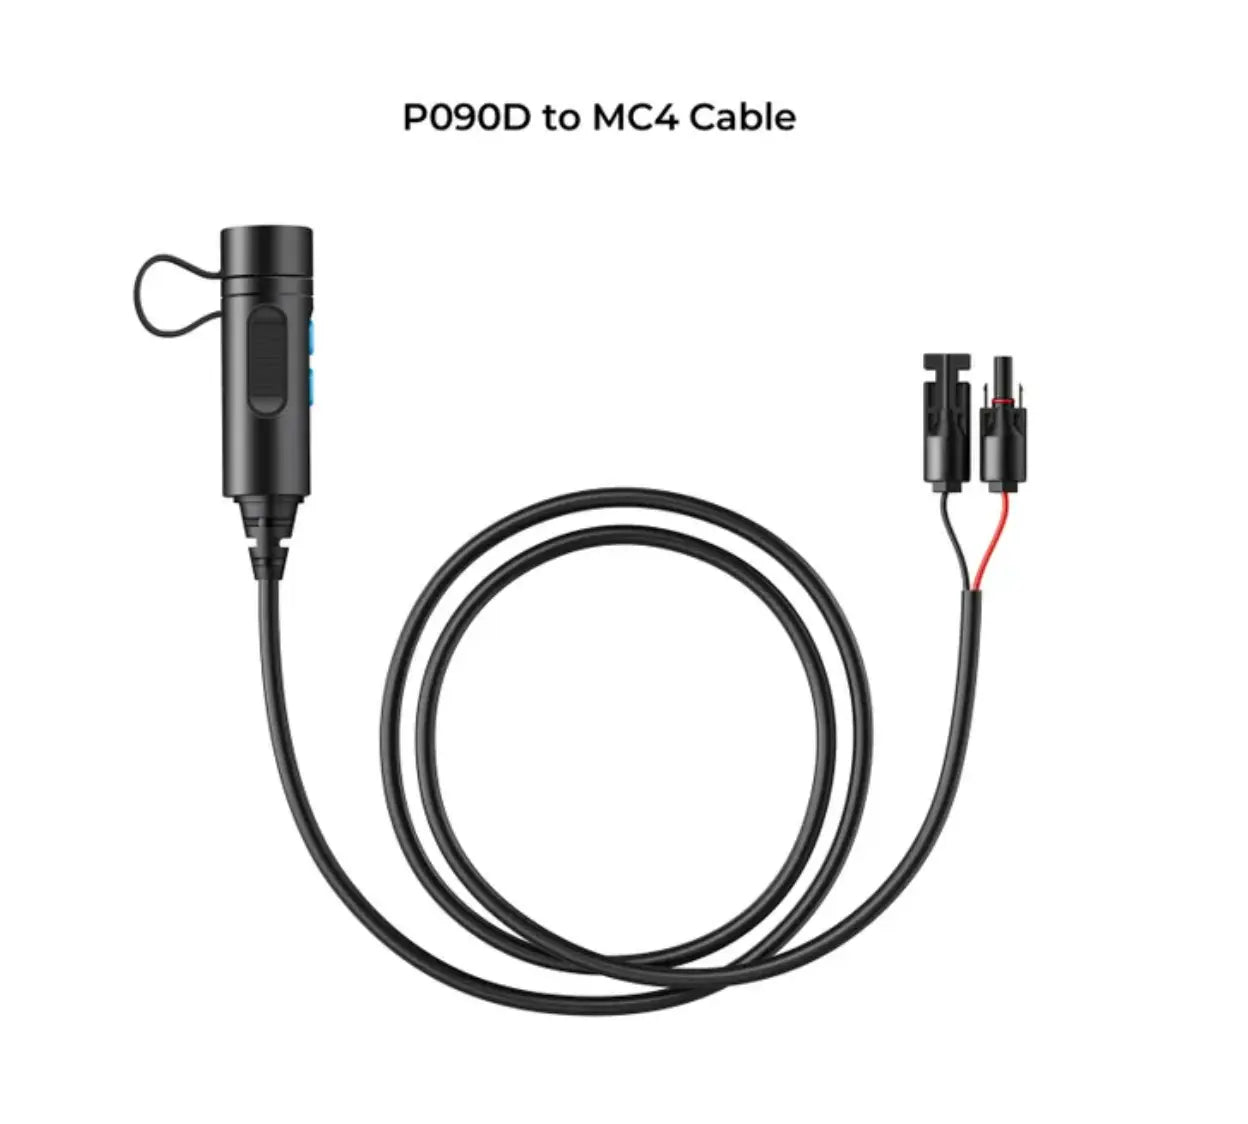 BLUETTI EXTERNAL BATTERY CONNECTION CABLE P090D TO MC4 FOR EP500P BLUETTI